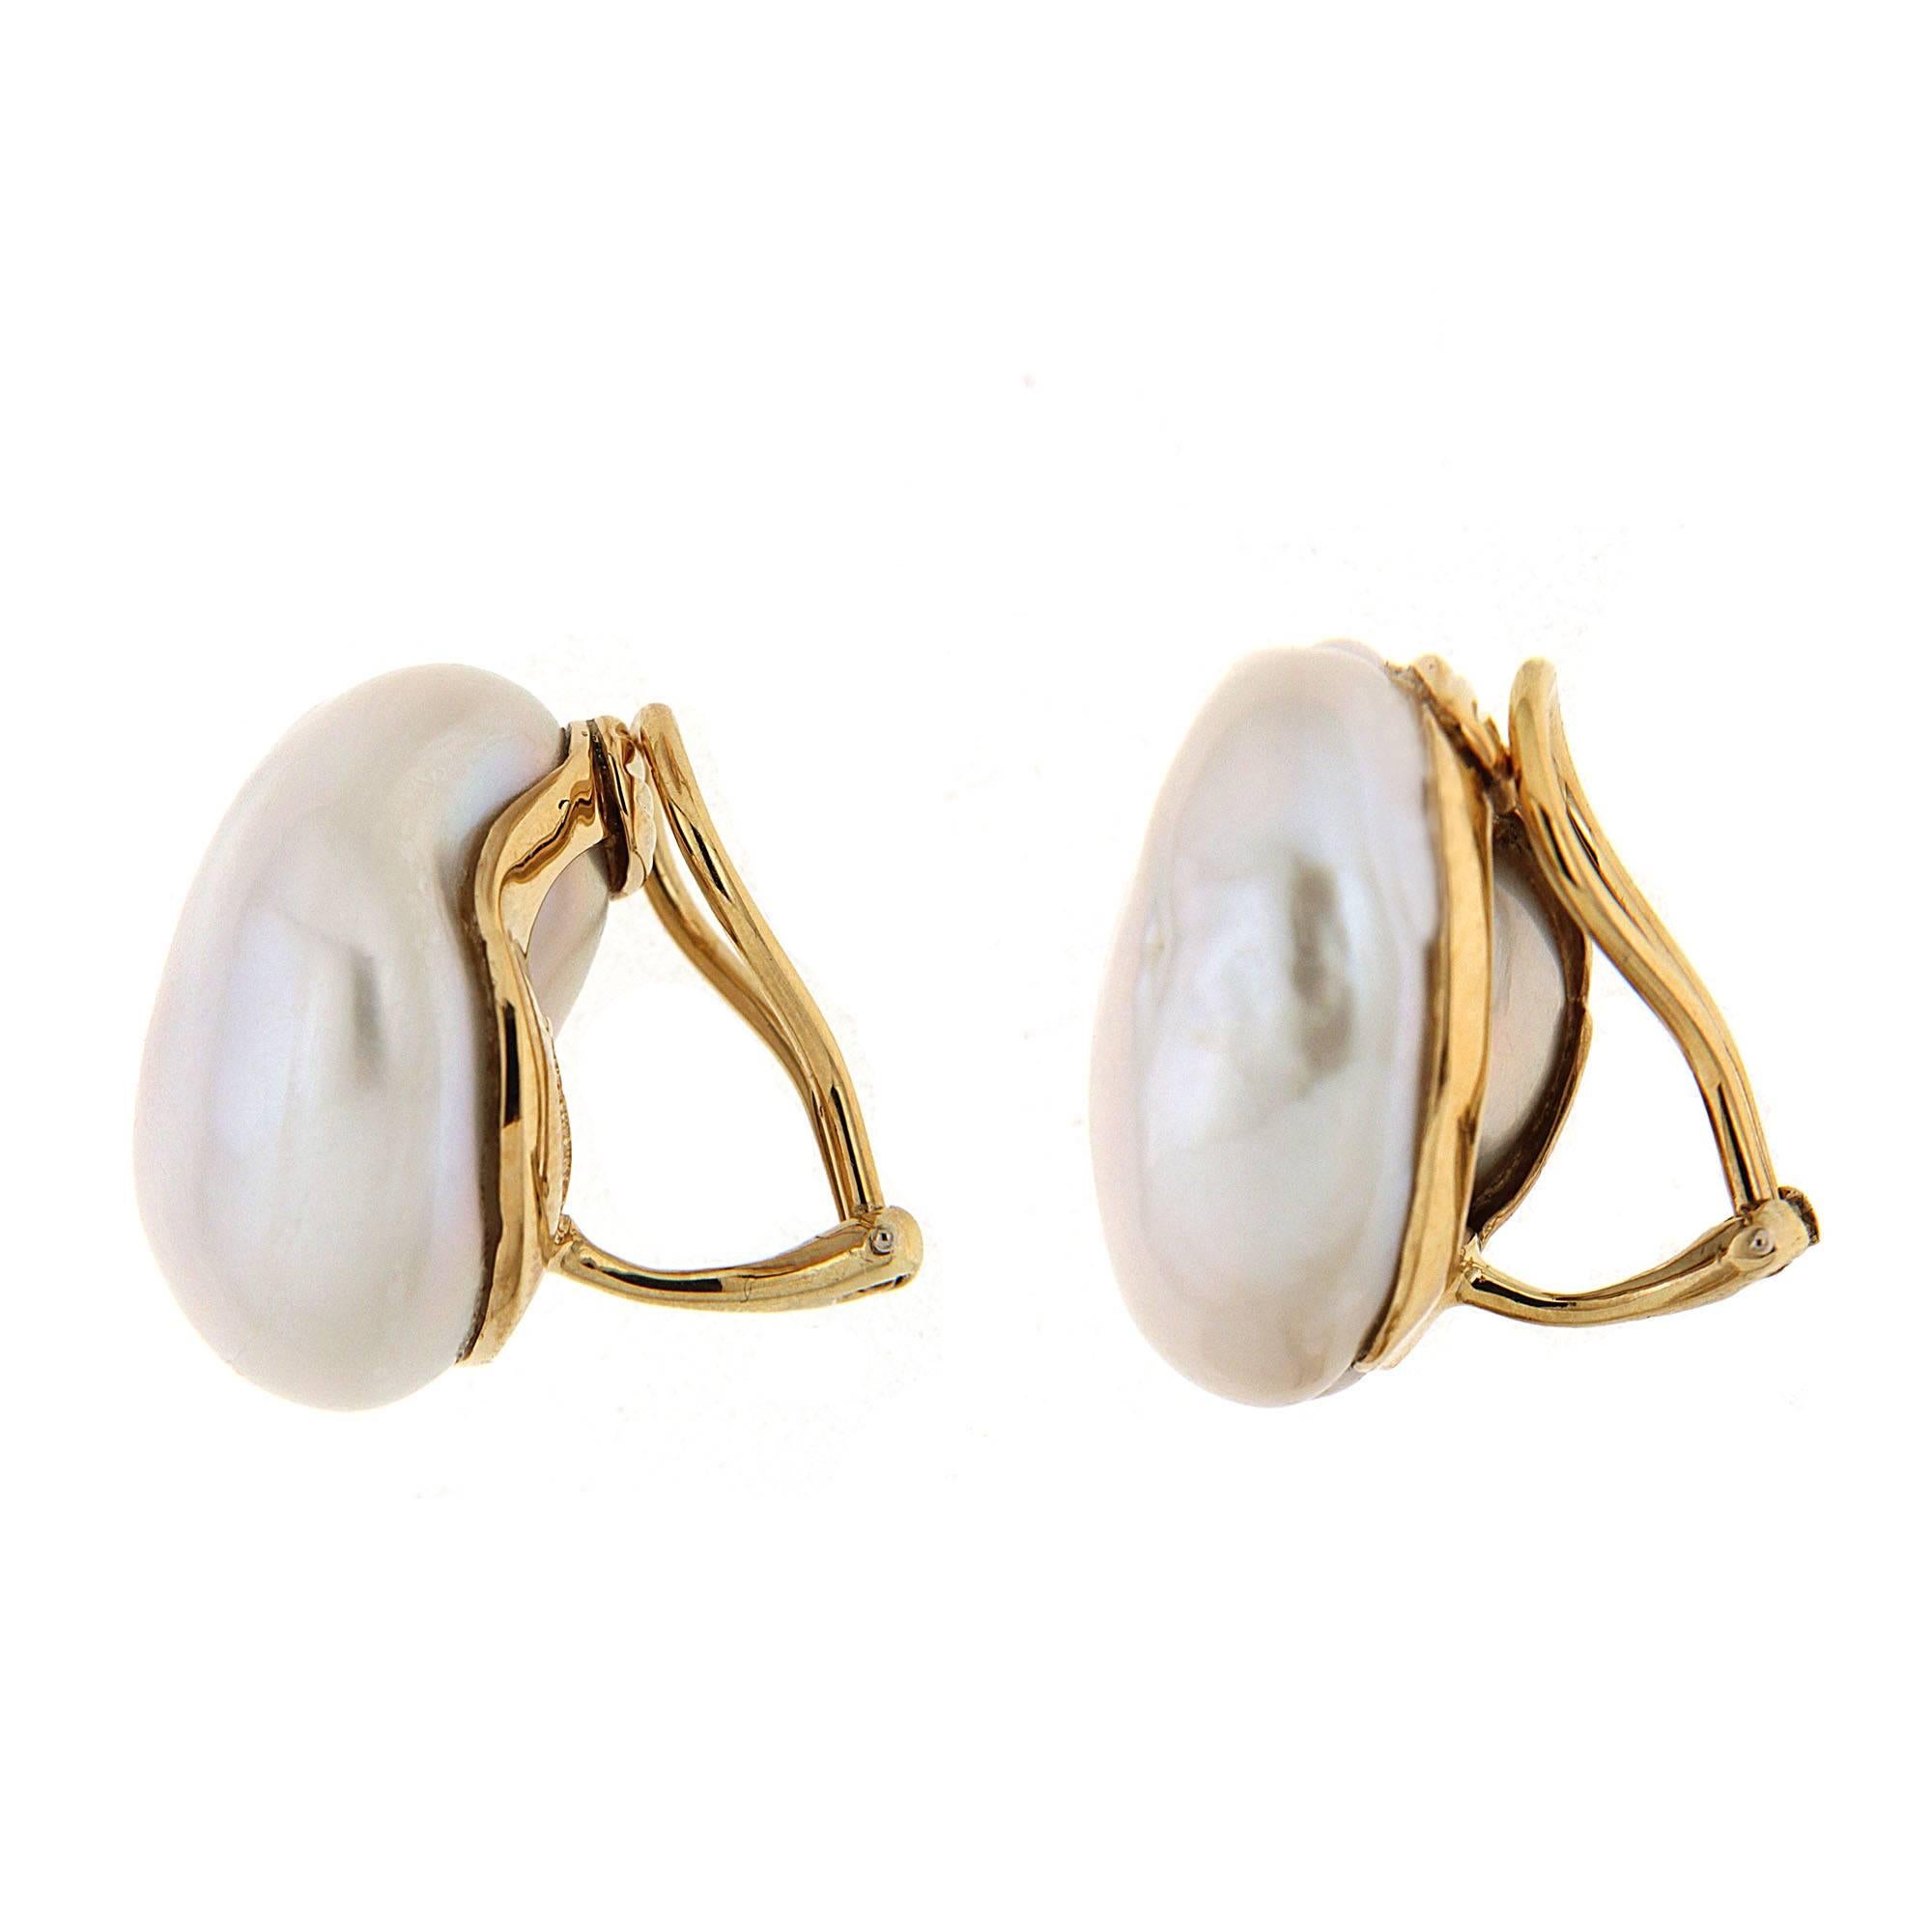 This pair of lovely Freshwater Baroque Pearl Earrings is finished in 18kt yellow gold with clip backs. (posts can be added on upon request).